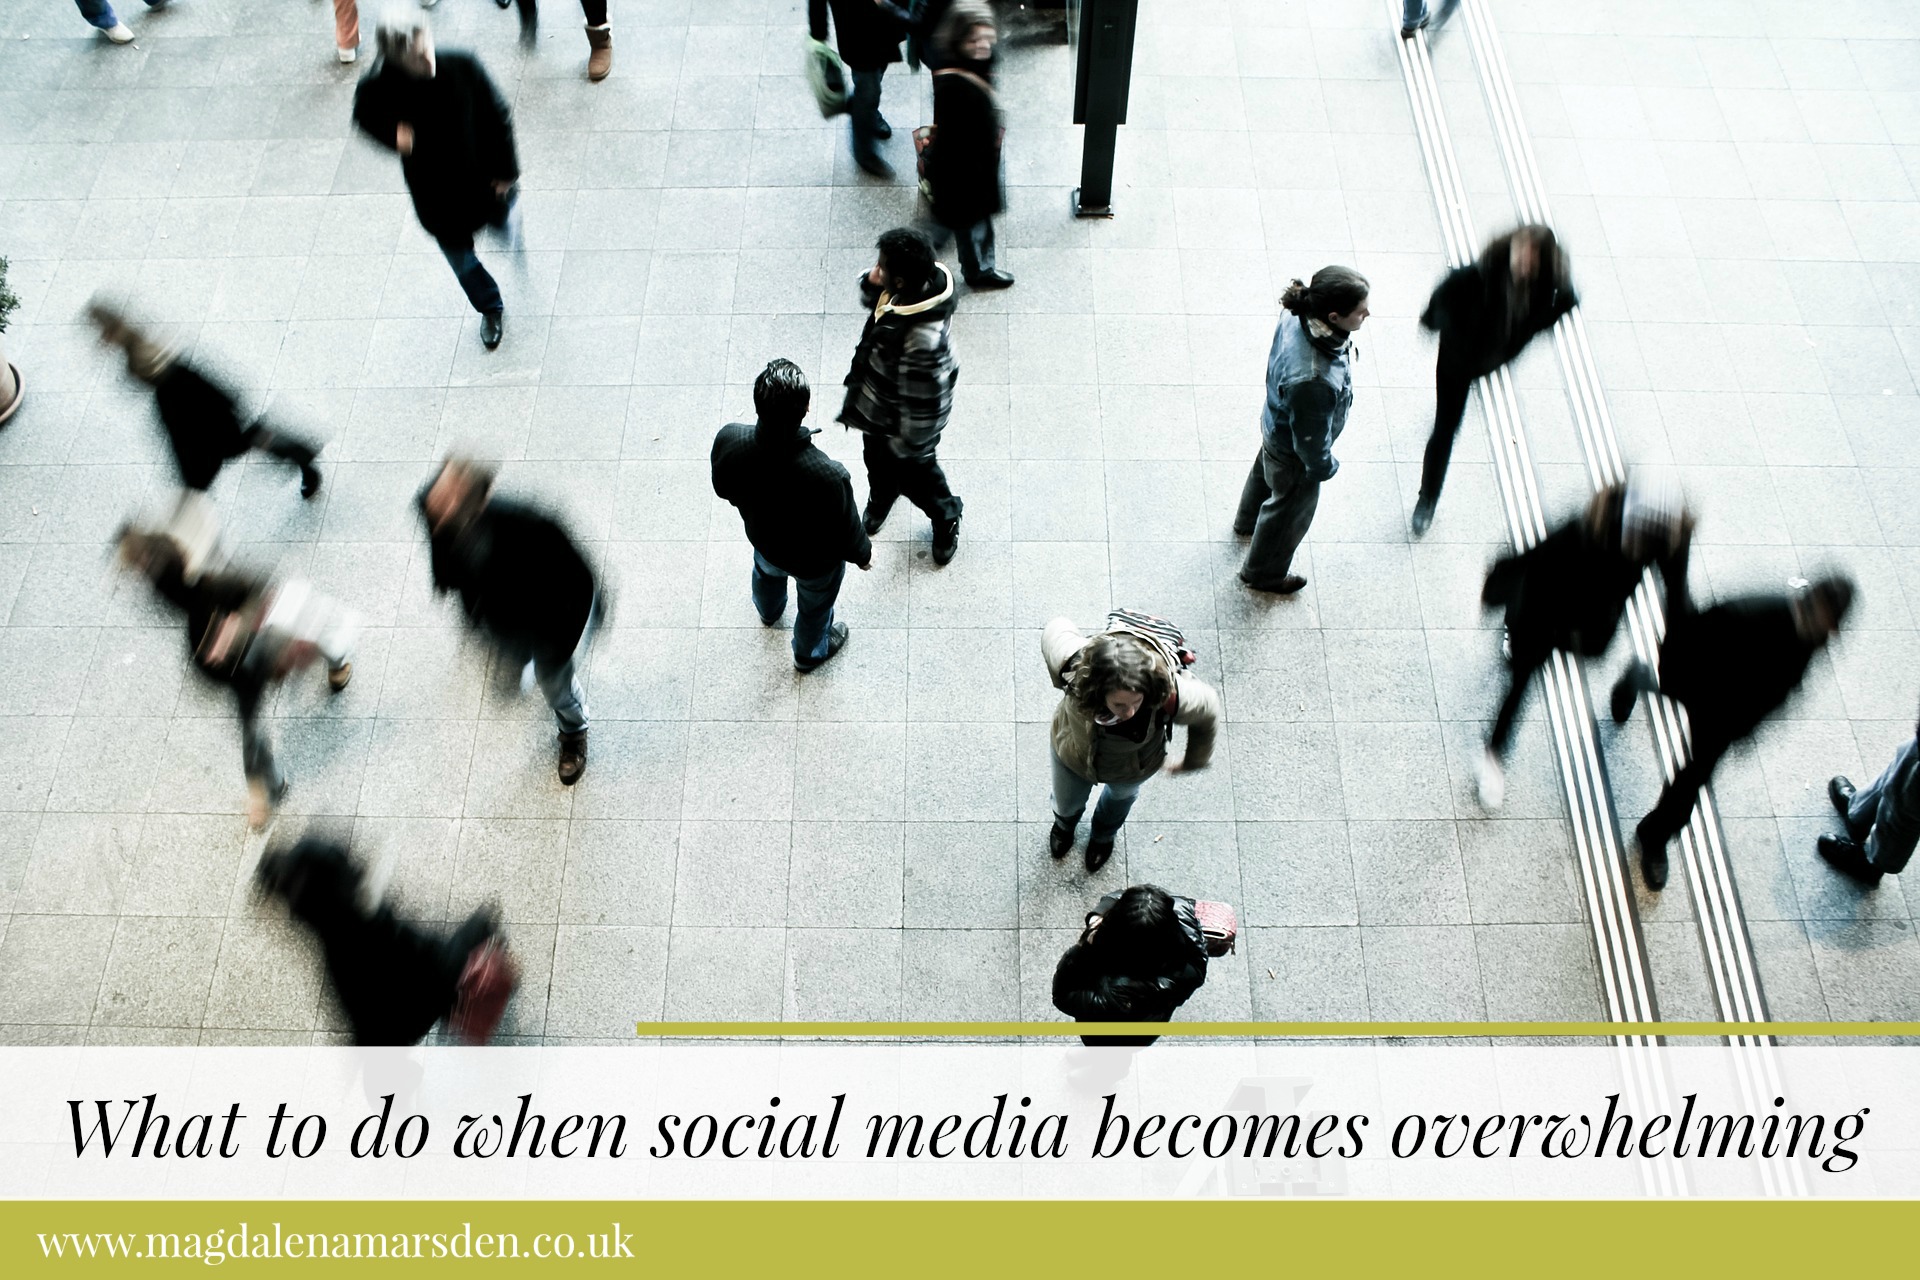 What to do when social media becomes overwhelming